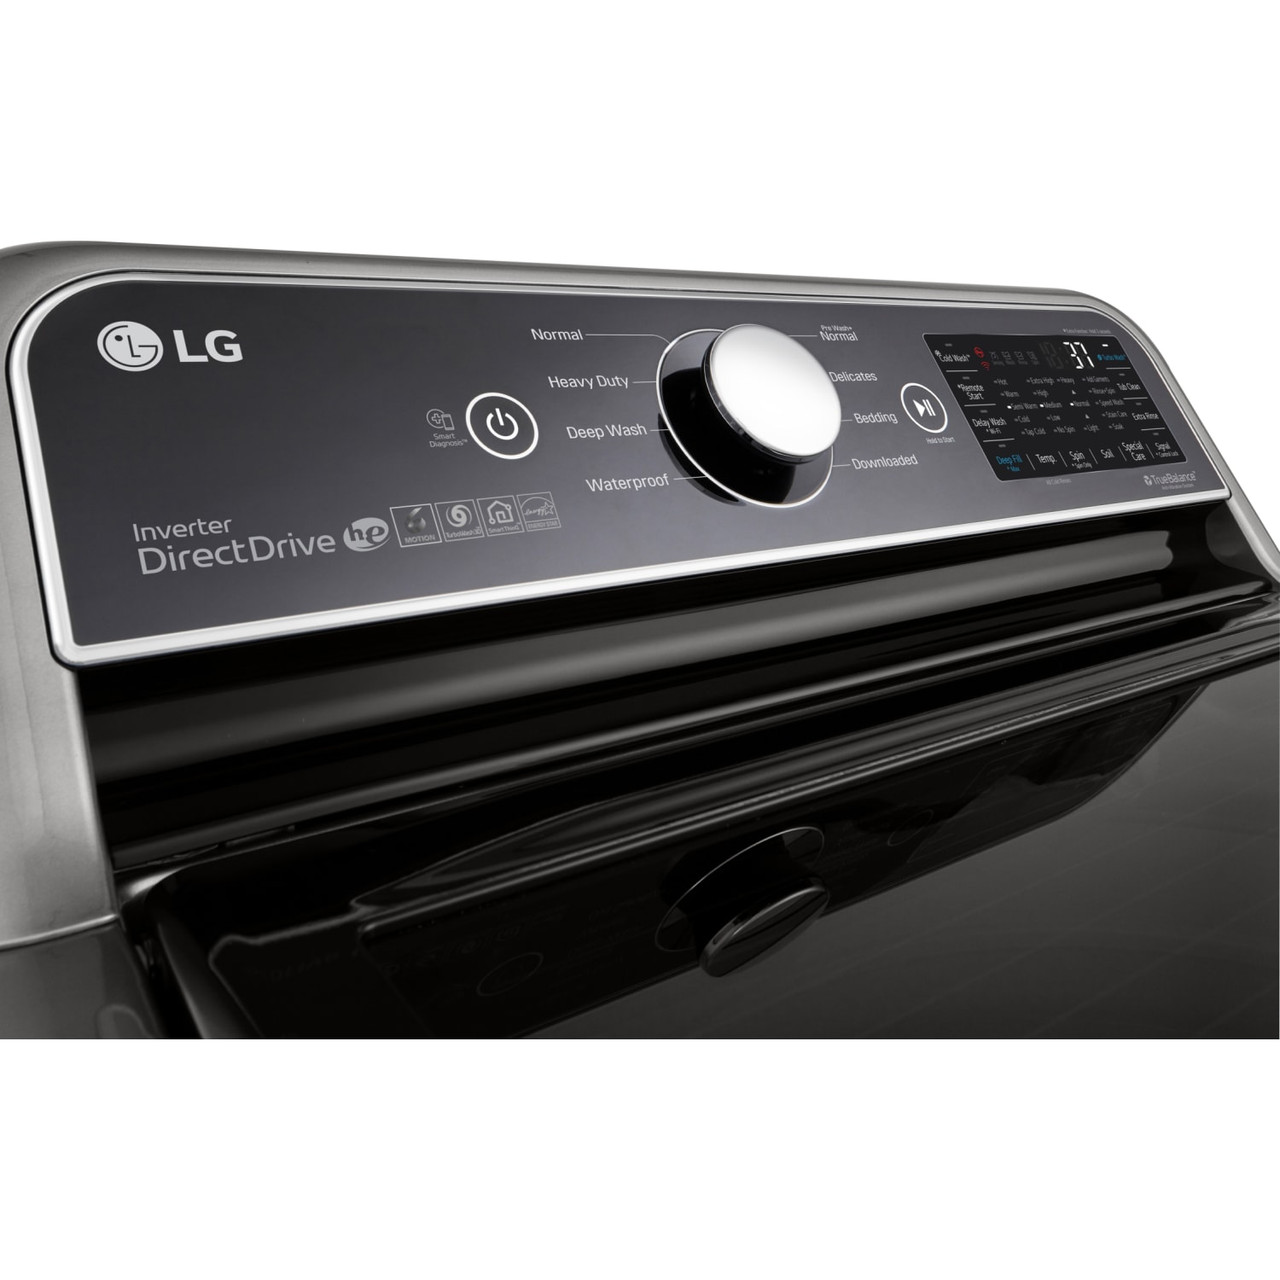 LG 4.8 cu. ft. Smart Wi-Fi Enabled Top Load Washer with 4-Way Agitator and TurboWash3D - WT7305CV